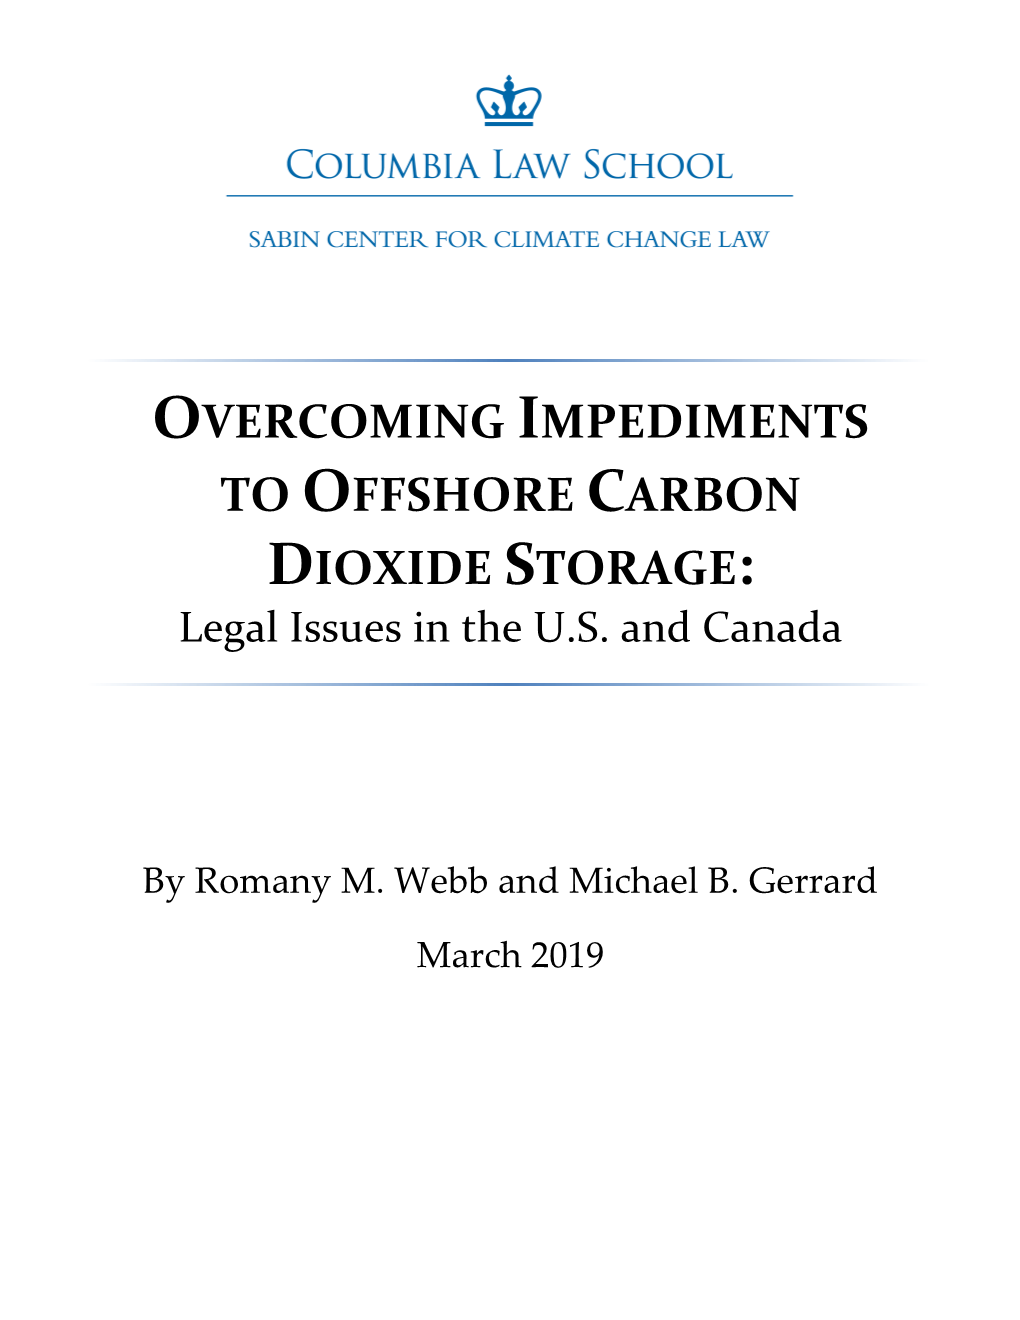 TO OFFSHORE CARBON DIOXIDE STORAGE: Legal Issues in the U.S